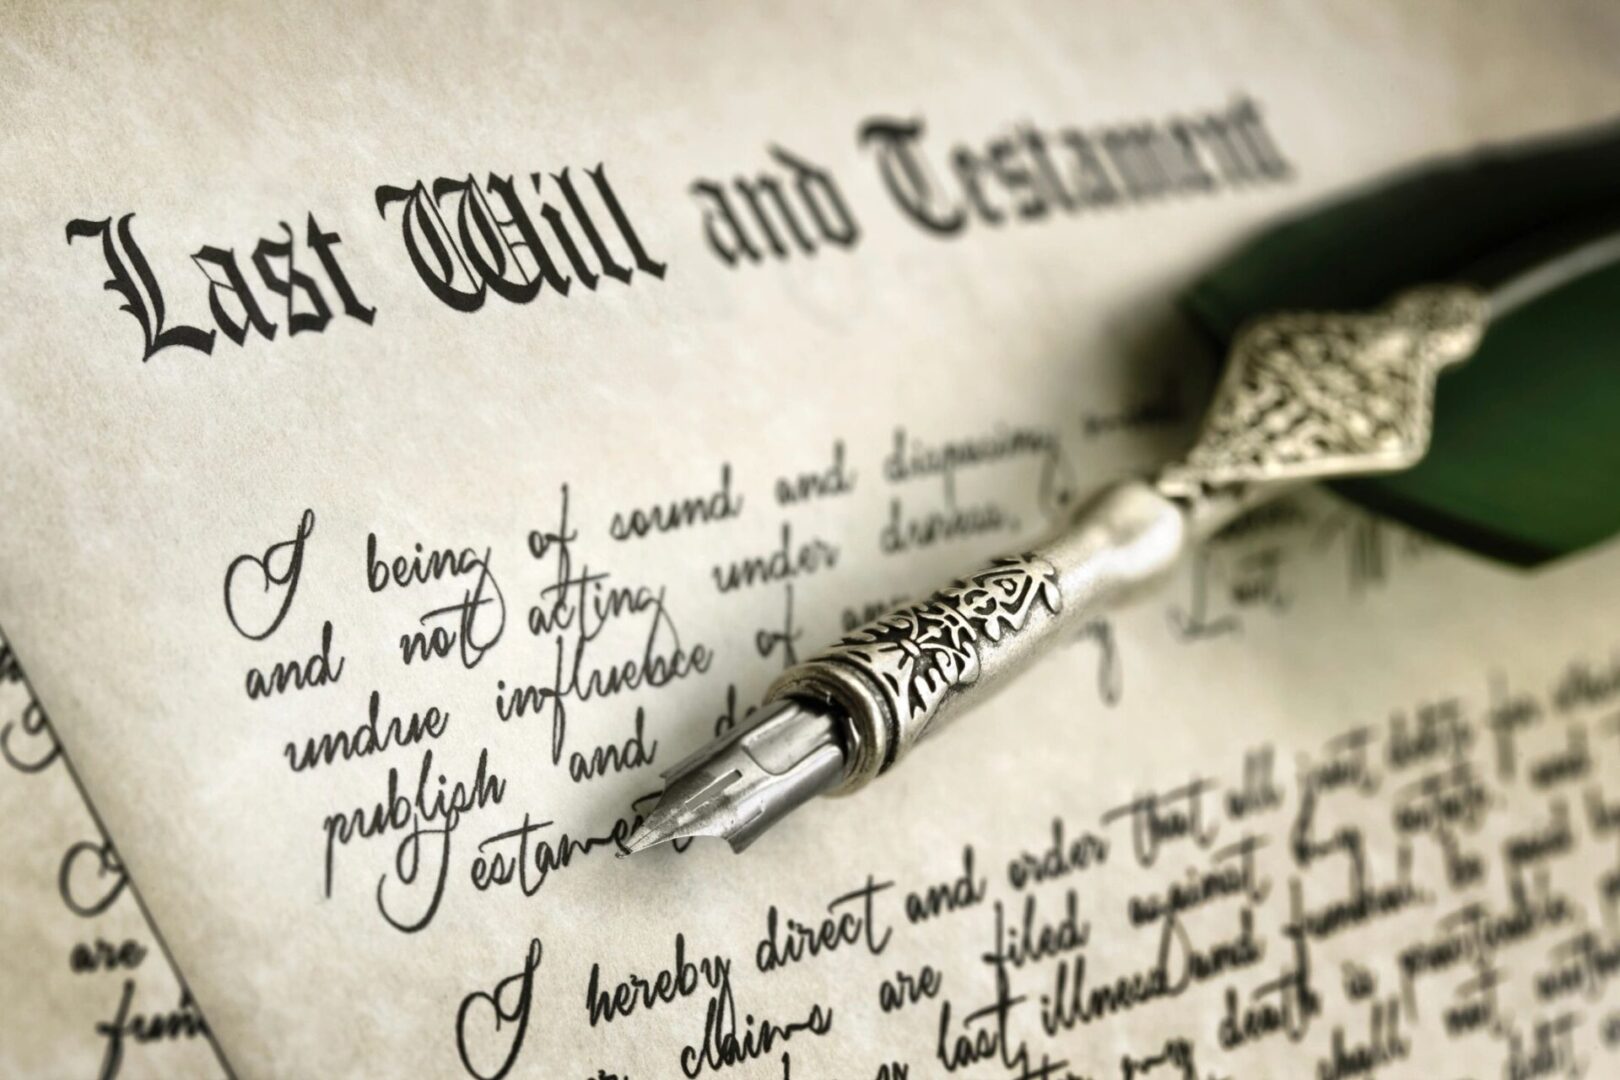 A pen and paper on top of a will.